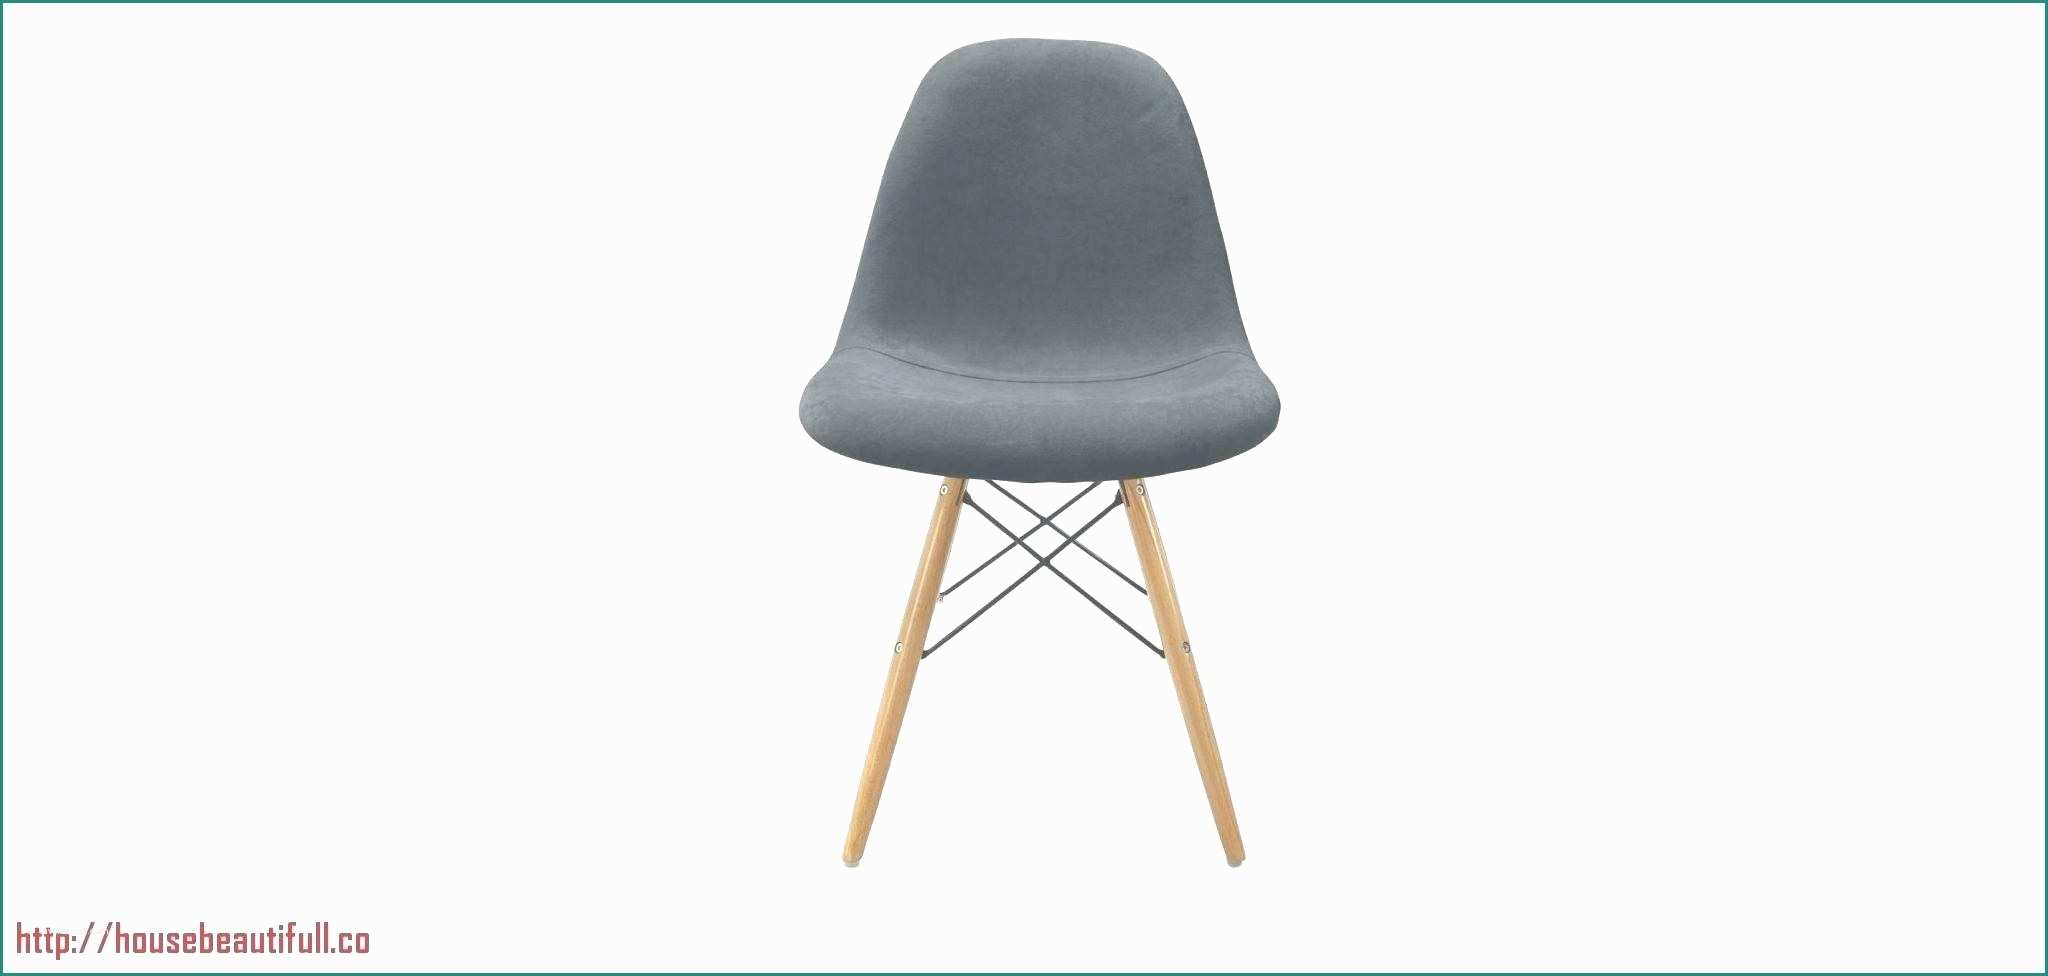 Sedia Eames originale E Chaise Eiffel Eames Excellent Charles Eames Sthle Stunning